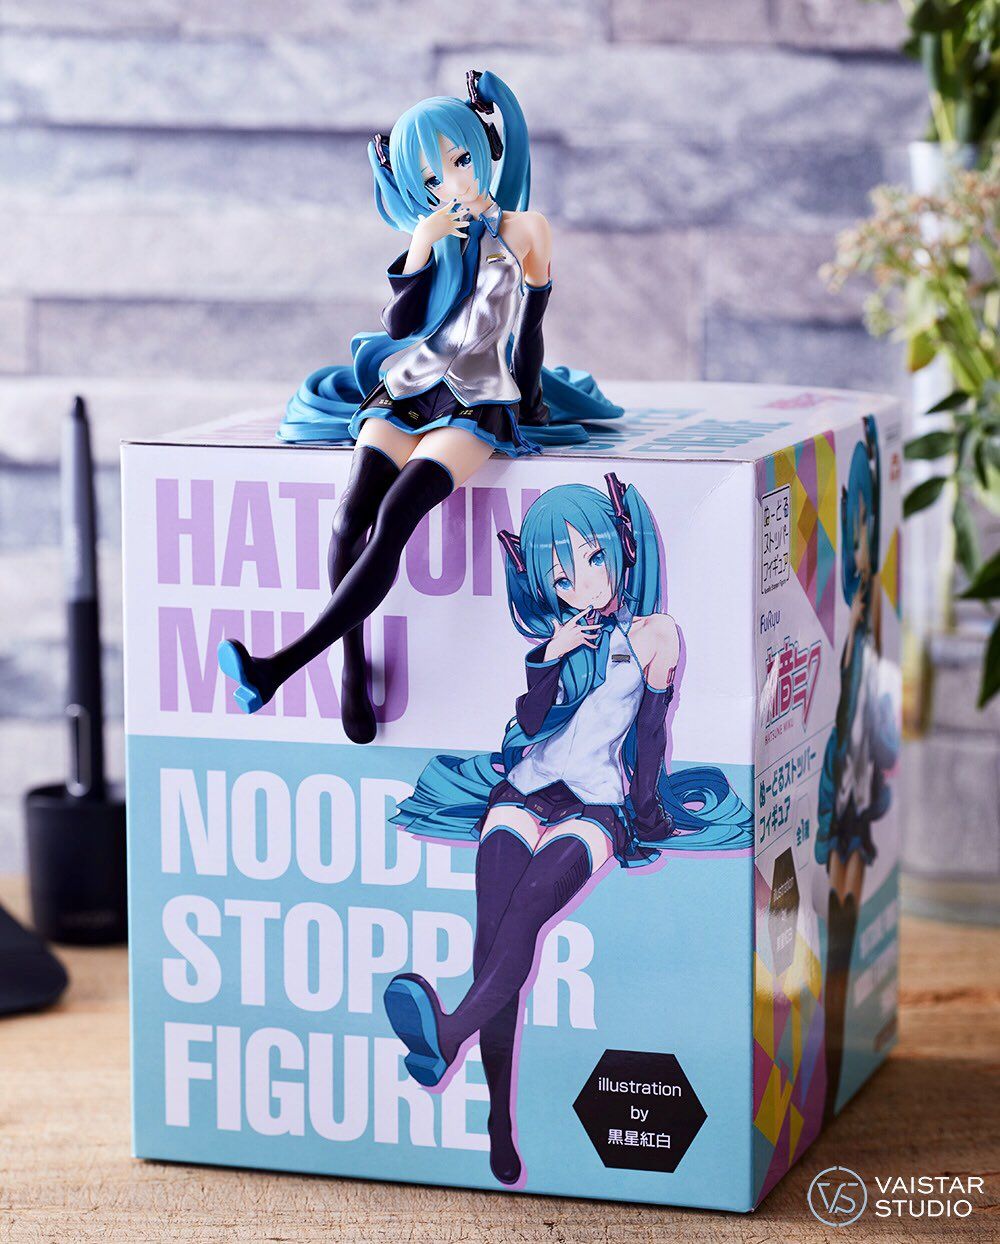 [Hatsune Miku] Nuyoru Stopper Figure, too much color and become a topic erotic 16